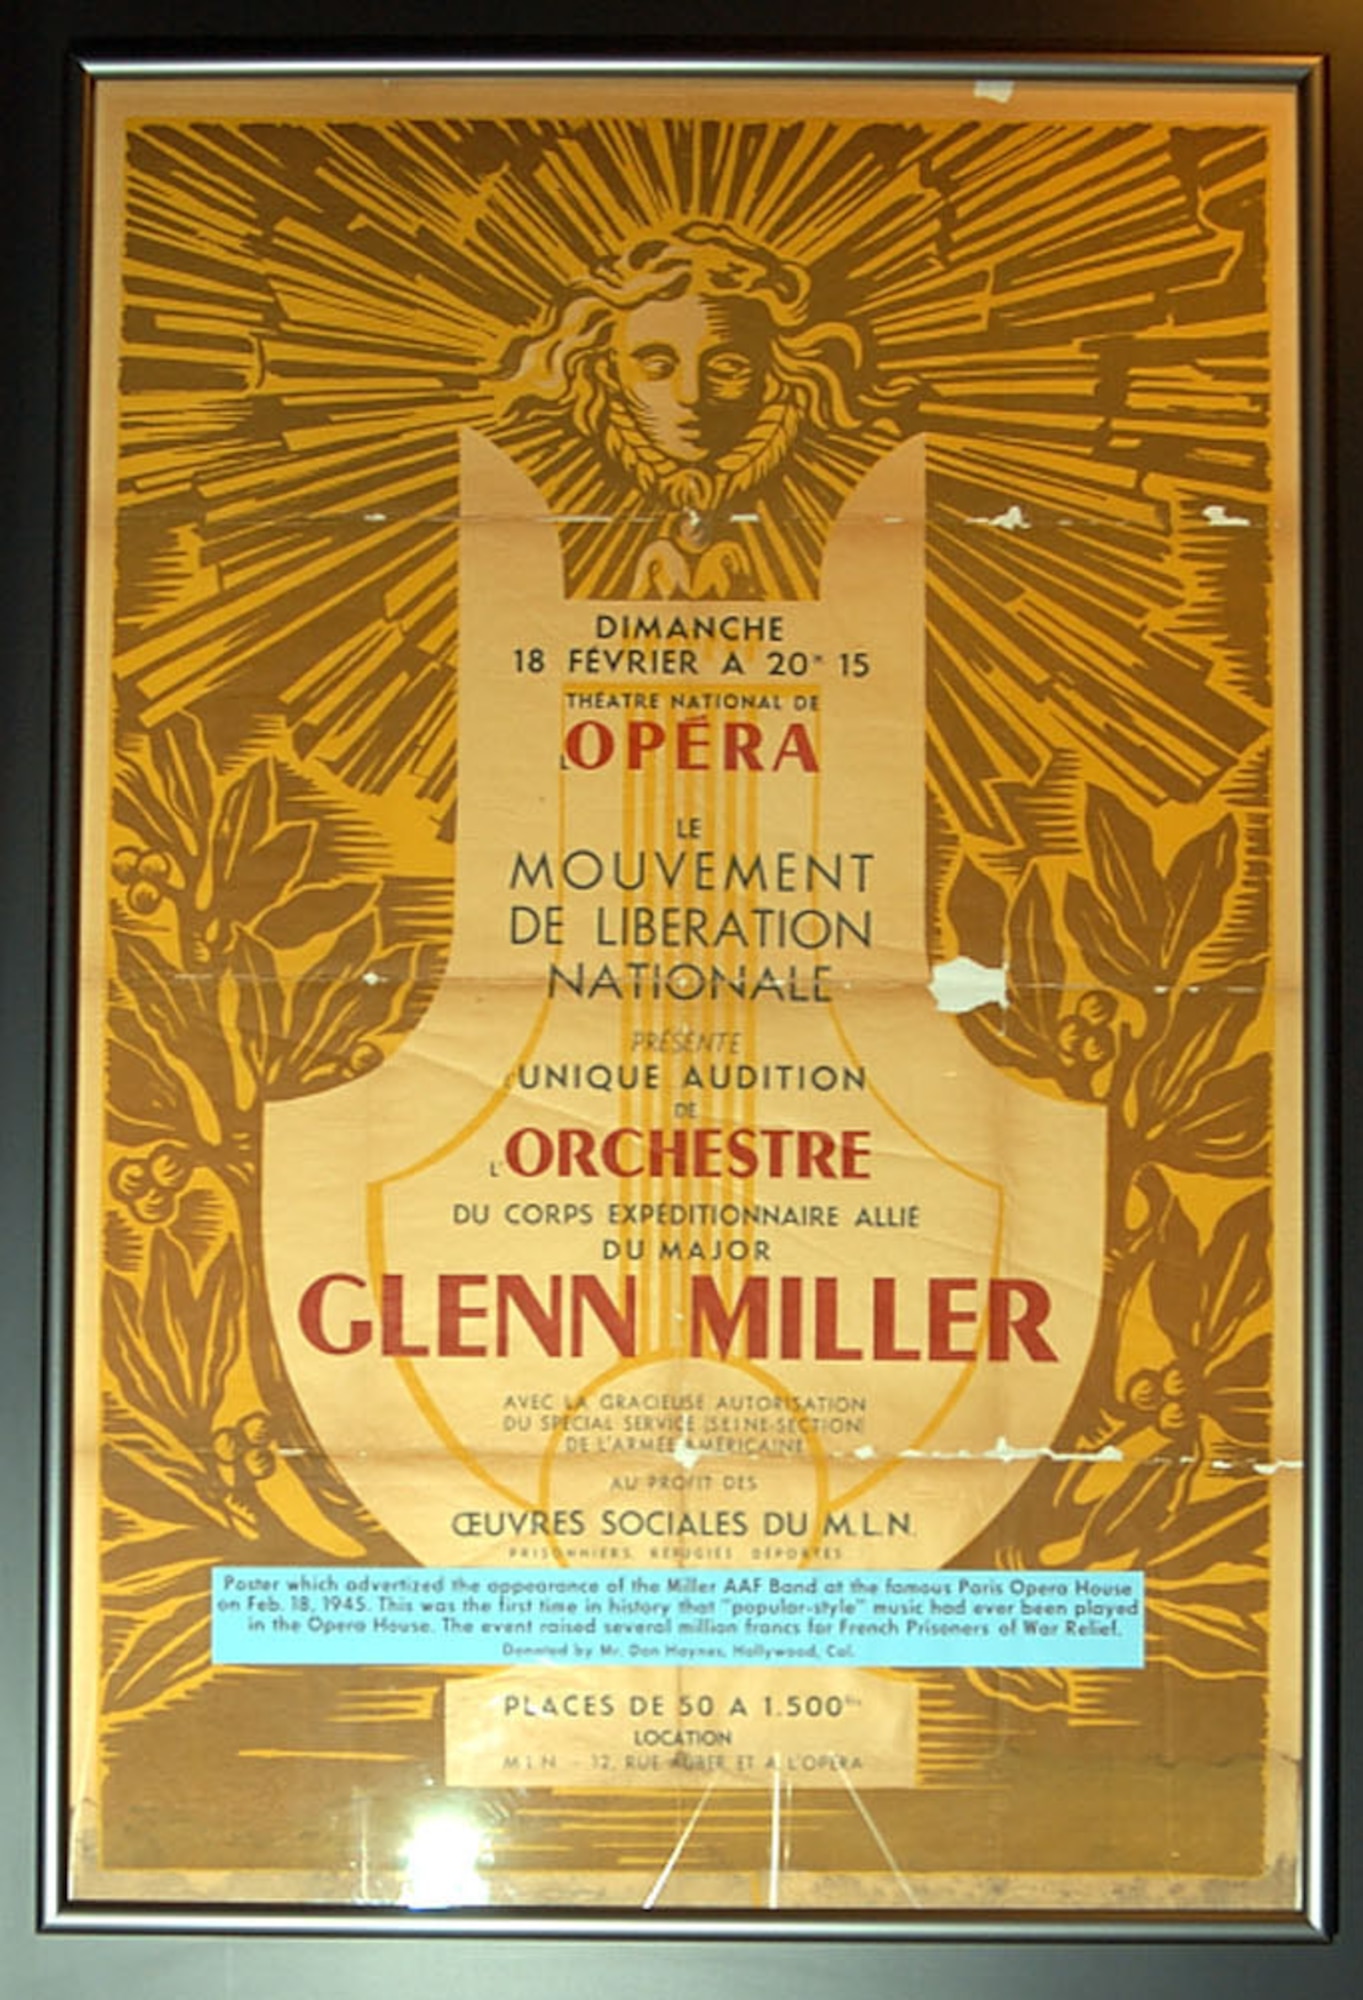 DAYTON, Ohio -- Poster advertising the appearance of the Maj. Glenn Miller Army Air Force Band at the famous Paris Opera House on Feb. 18, 1945. This was the first time in history that "popular-style" music had ever been played in the Opera House. The event raised several million francs for French Prisoners of War Relief. The poster is on display in the World War II Gallery at the National Museum of the U.S. Air Force. (U.S. Air Force photo)